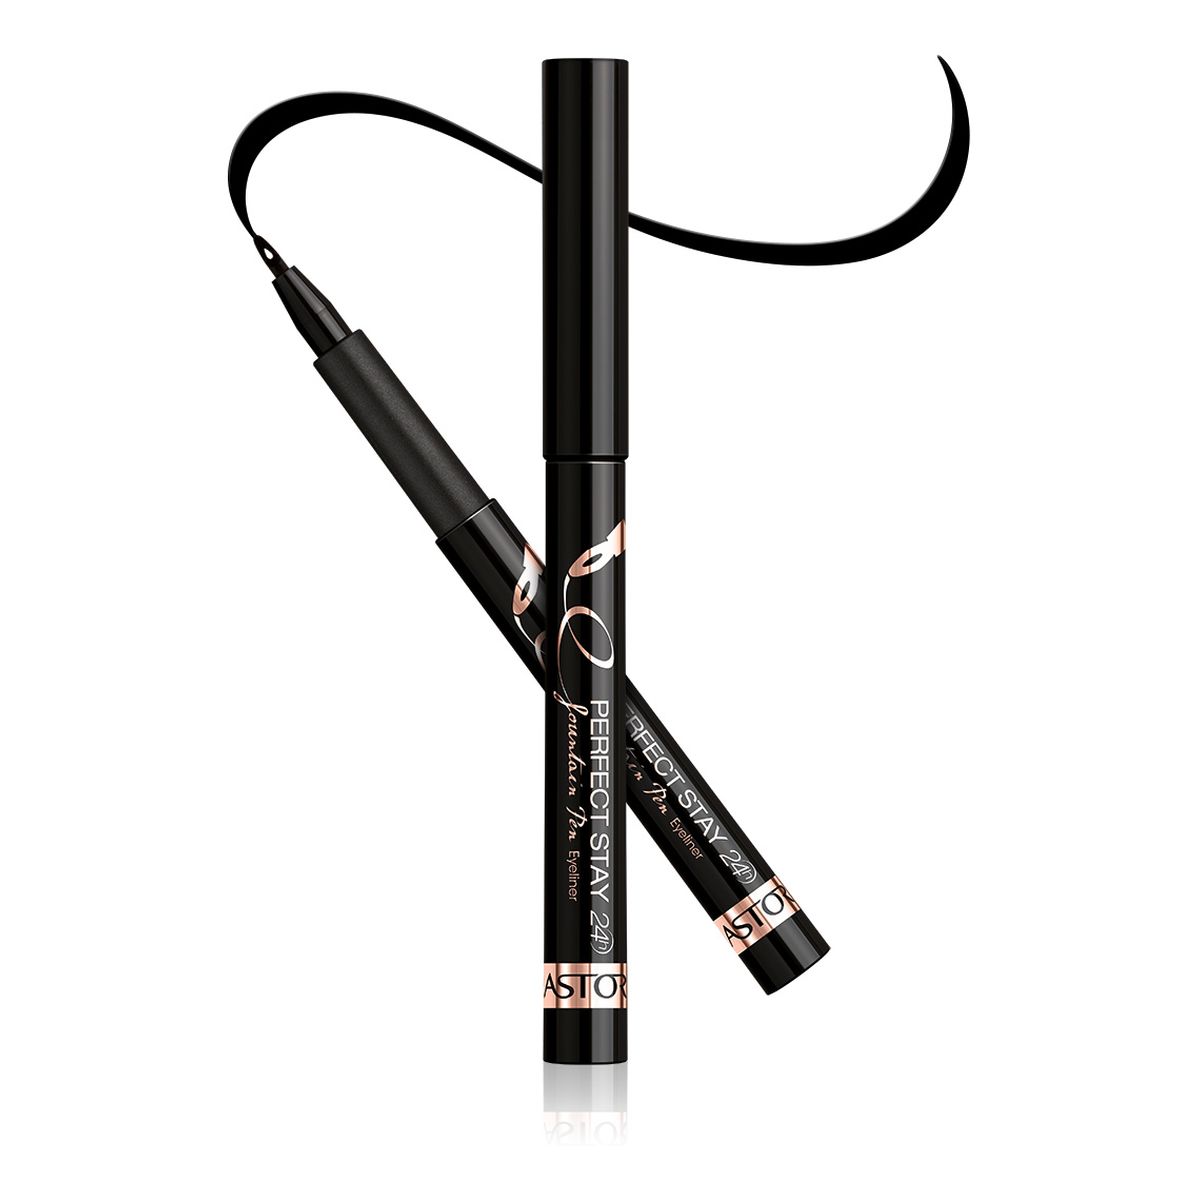 Astor Perfect Stay 24h Fountain Pen Eyeliner 3g